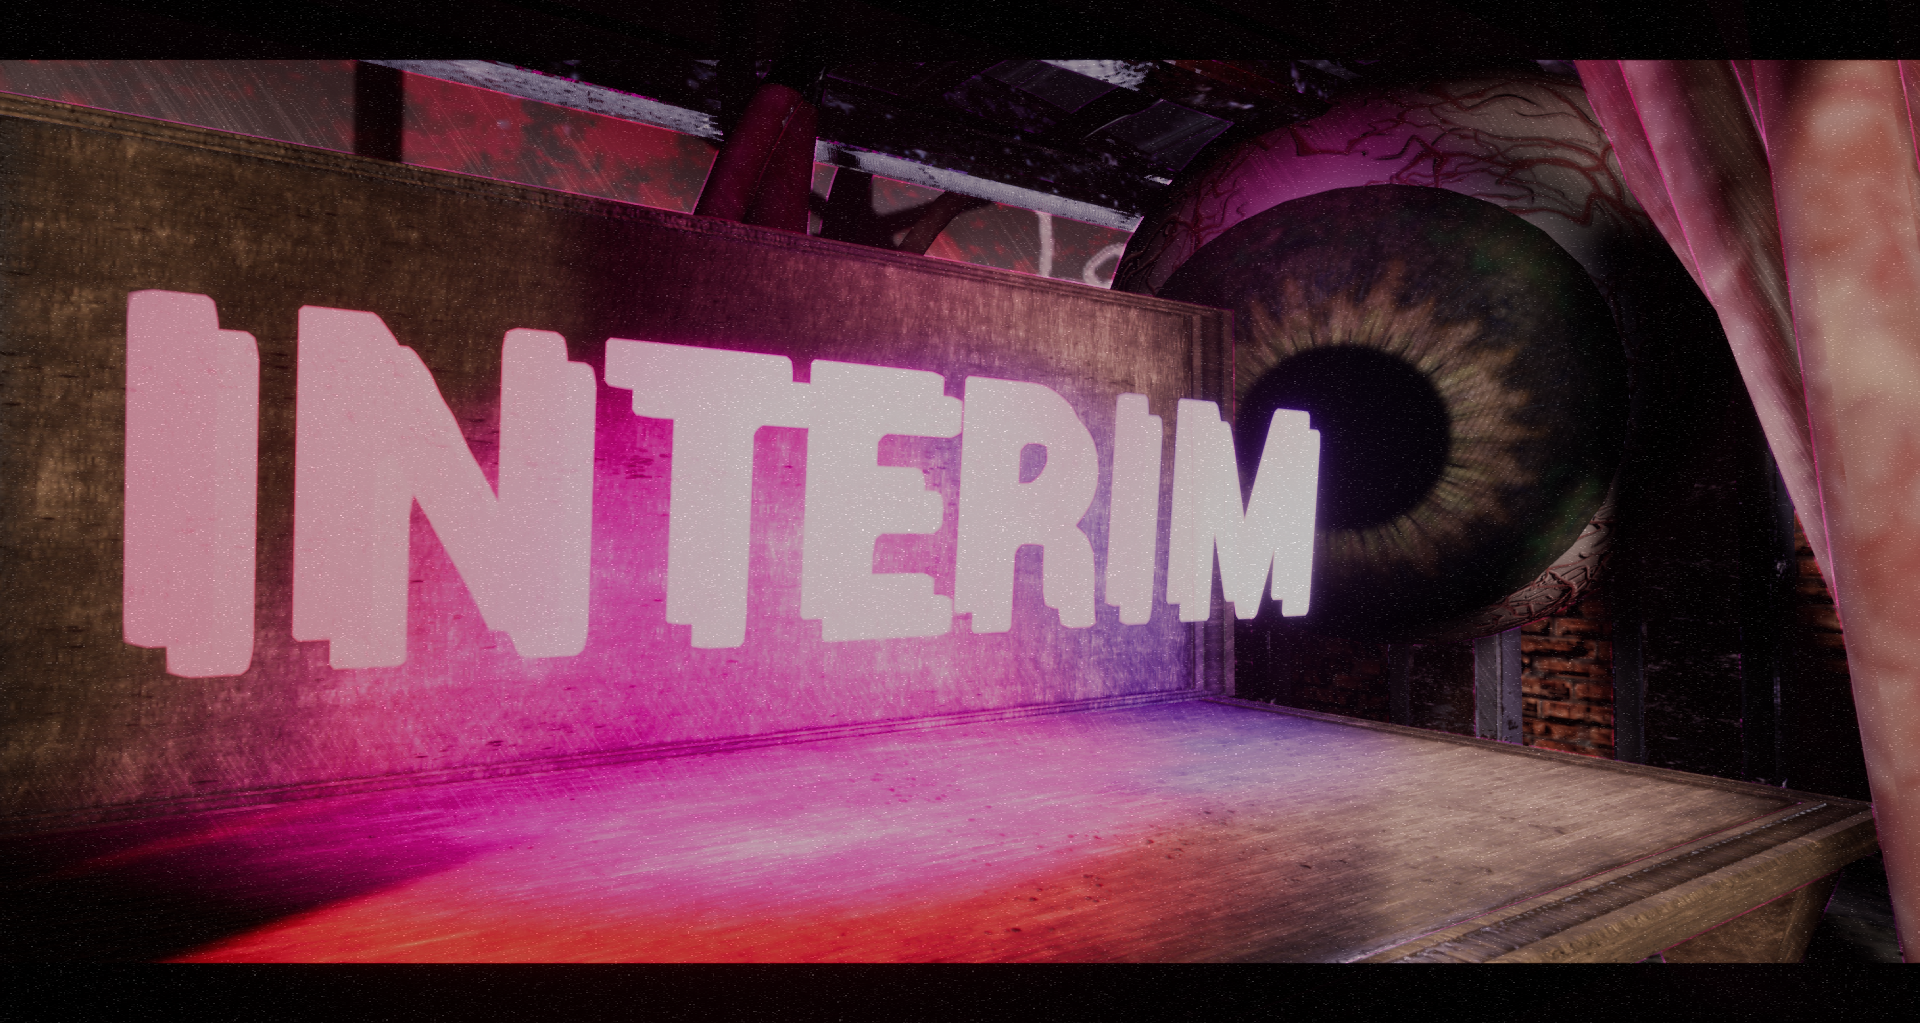 An empty stage with a pink light in the center. the word "INTERIM" is layered just ahead of the wall to create a 3D effect. A giant eyeball is  seen just behind the stage.